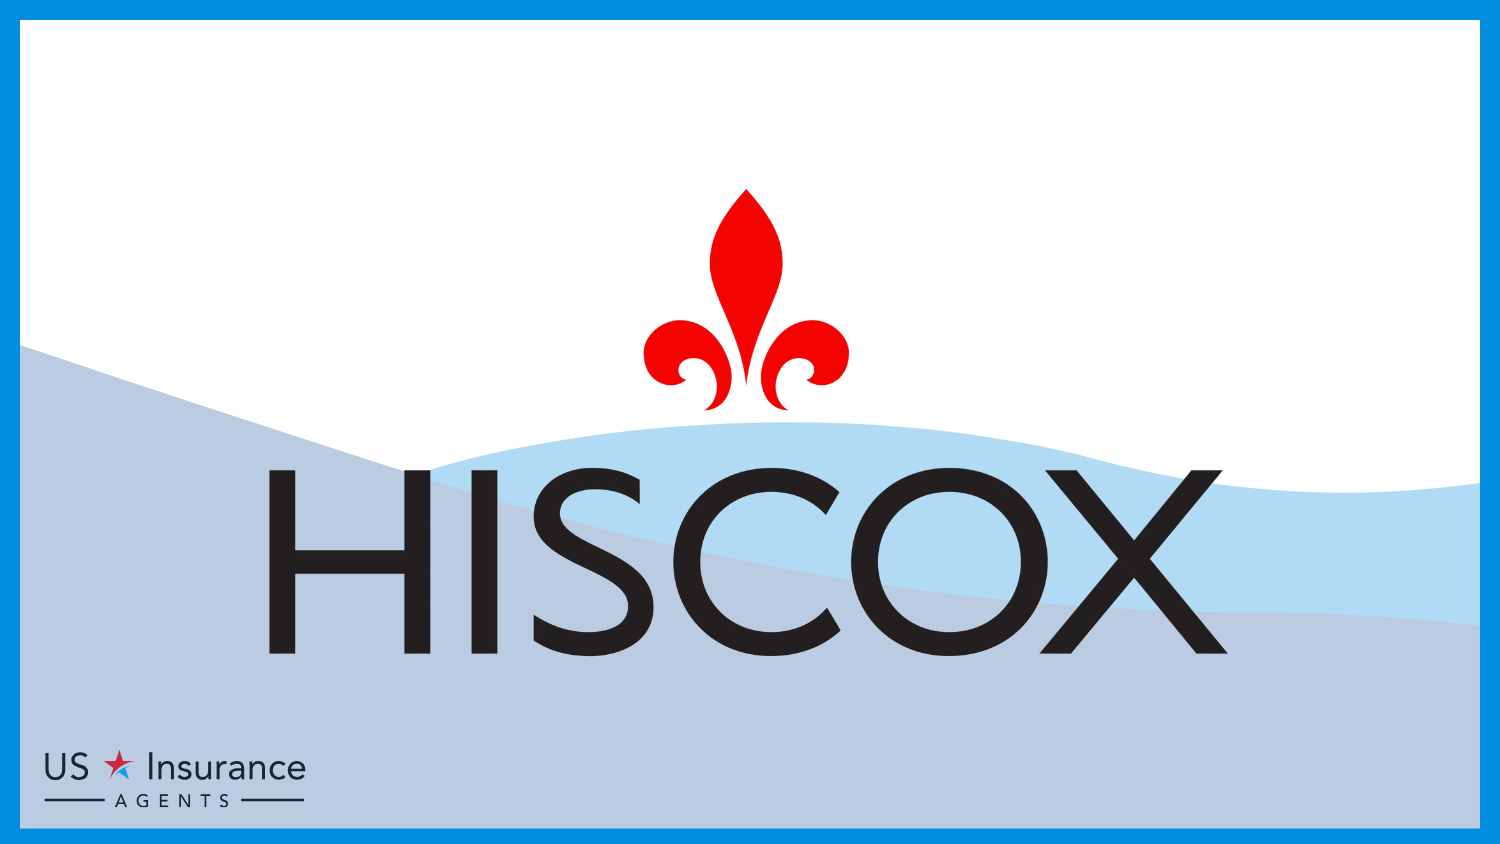 Hiscox: Best Business Insurance for Nightclubs